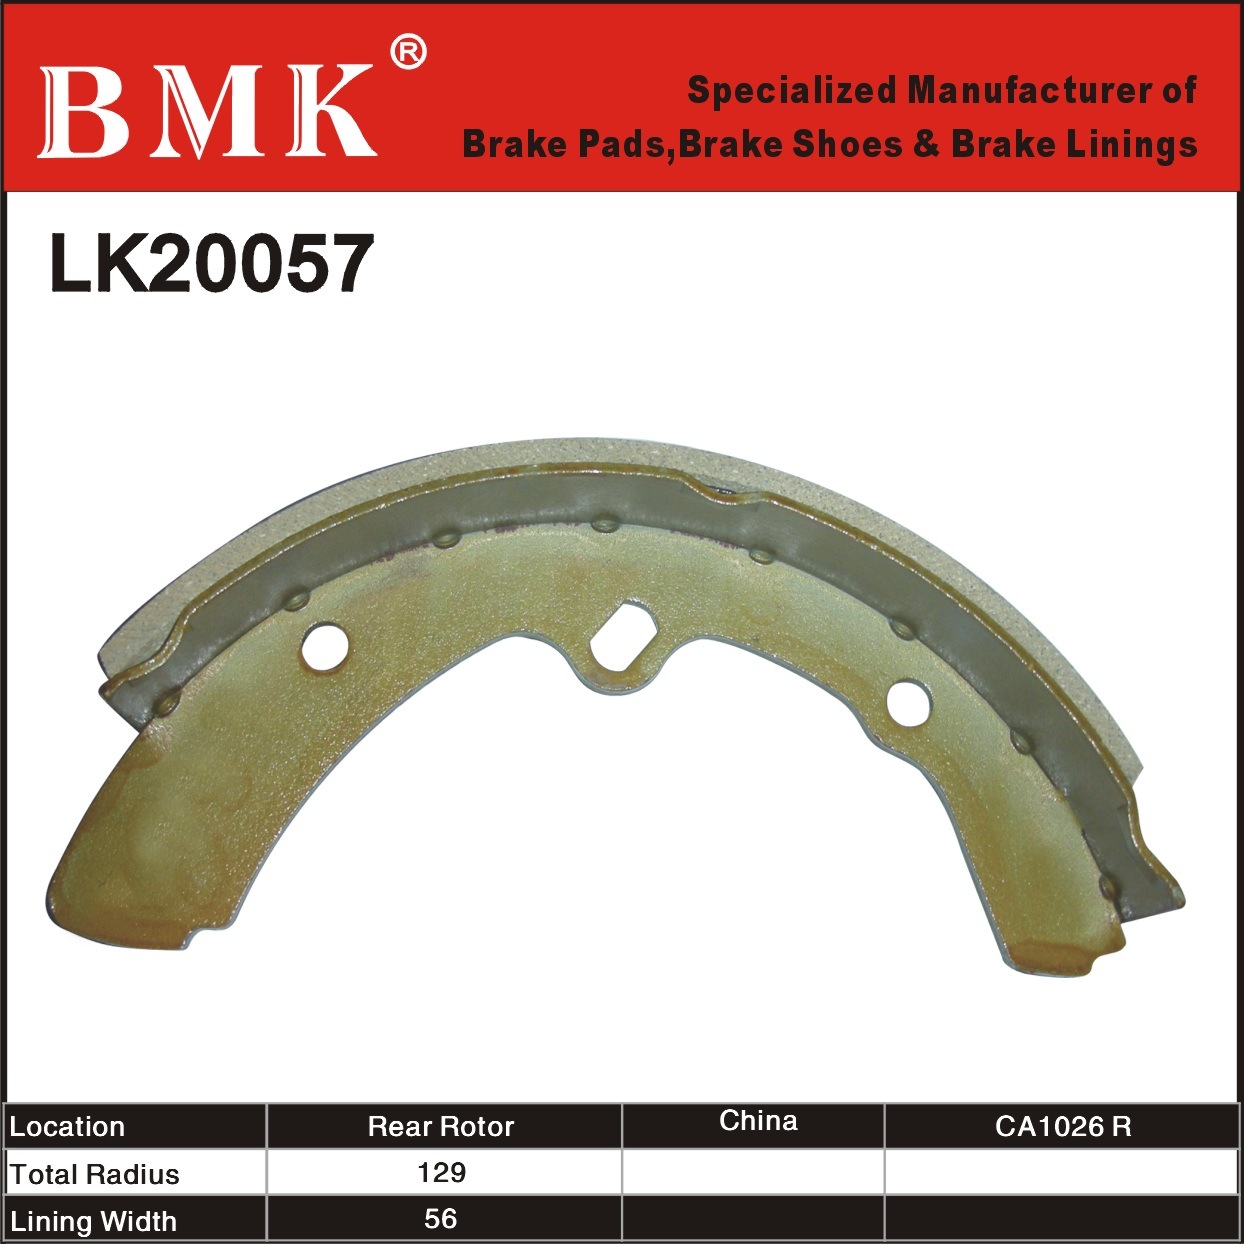 High Quality Brake Shoes (K20057) for Chinese Car